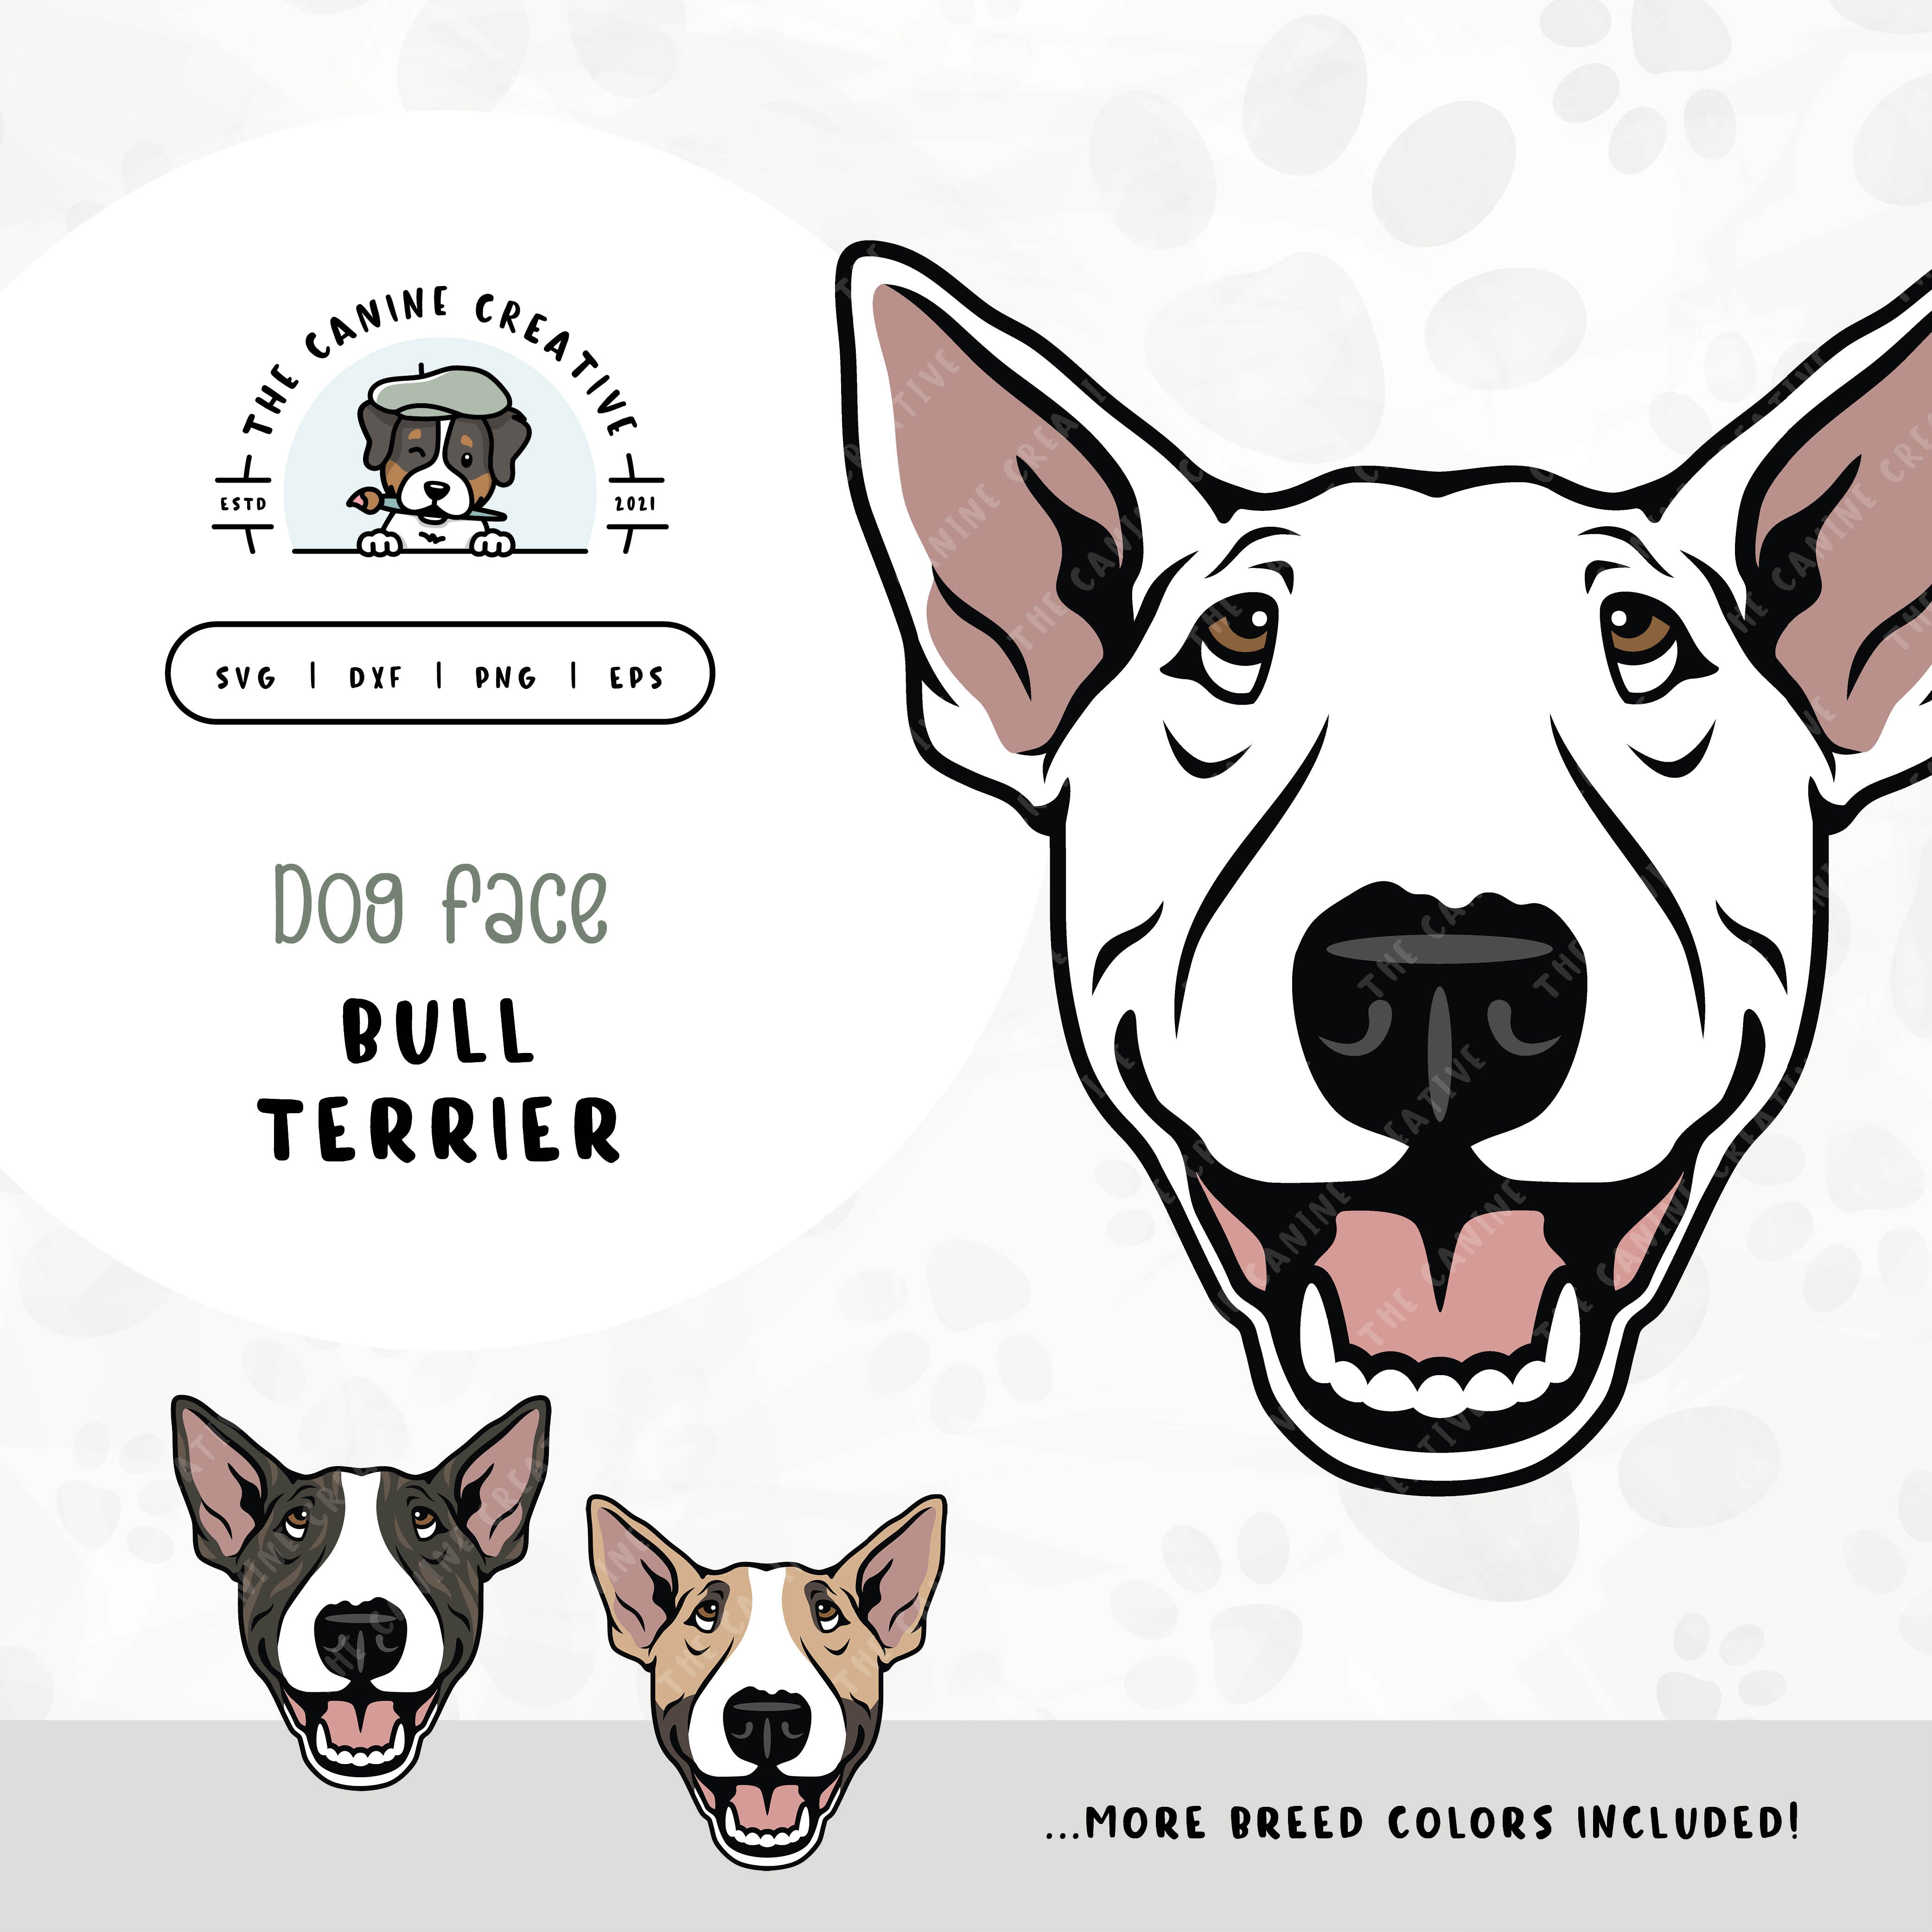 This illustrated design features a Bull Terrier face. File formats include: SVG, DXF, PNG, and EPS.